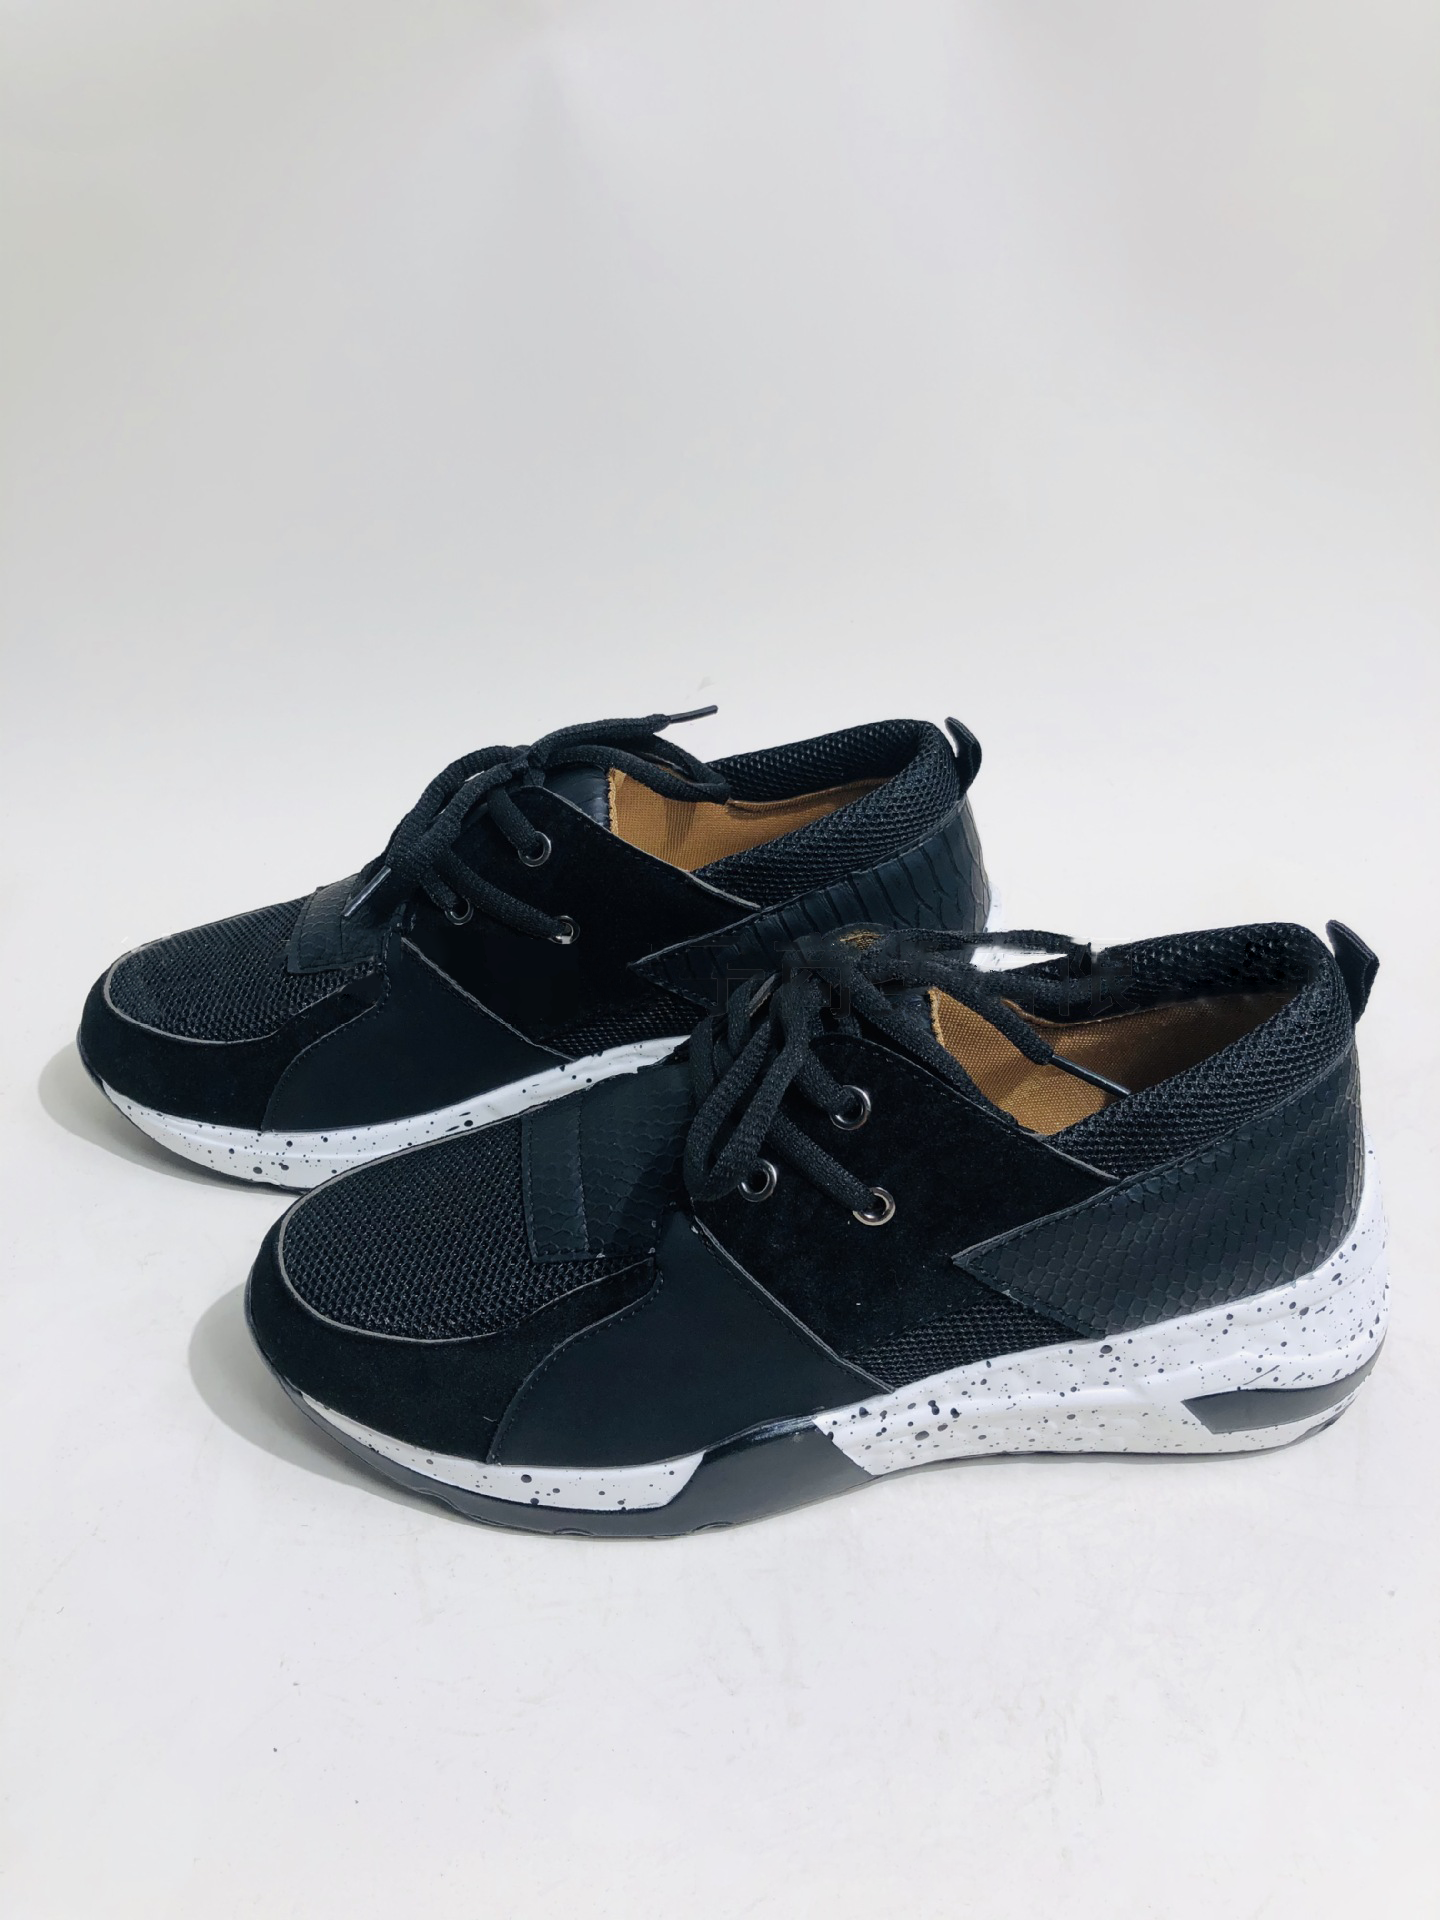 https://www.mydivinebeauty.biz/products/casual-womens-shoes-sports-shoes-flat-sneakers?utm_content=ios&utm_medium=product-links&utm_source=copyToPasteboard